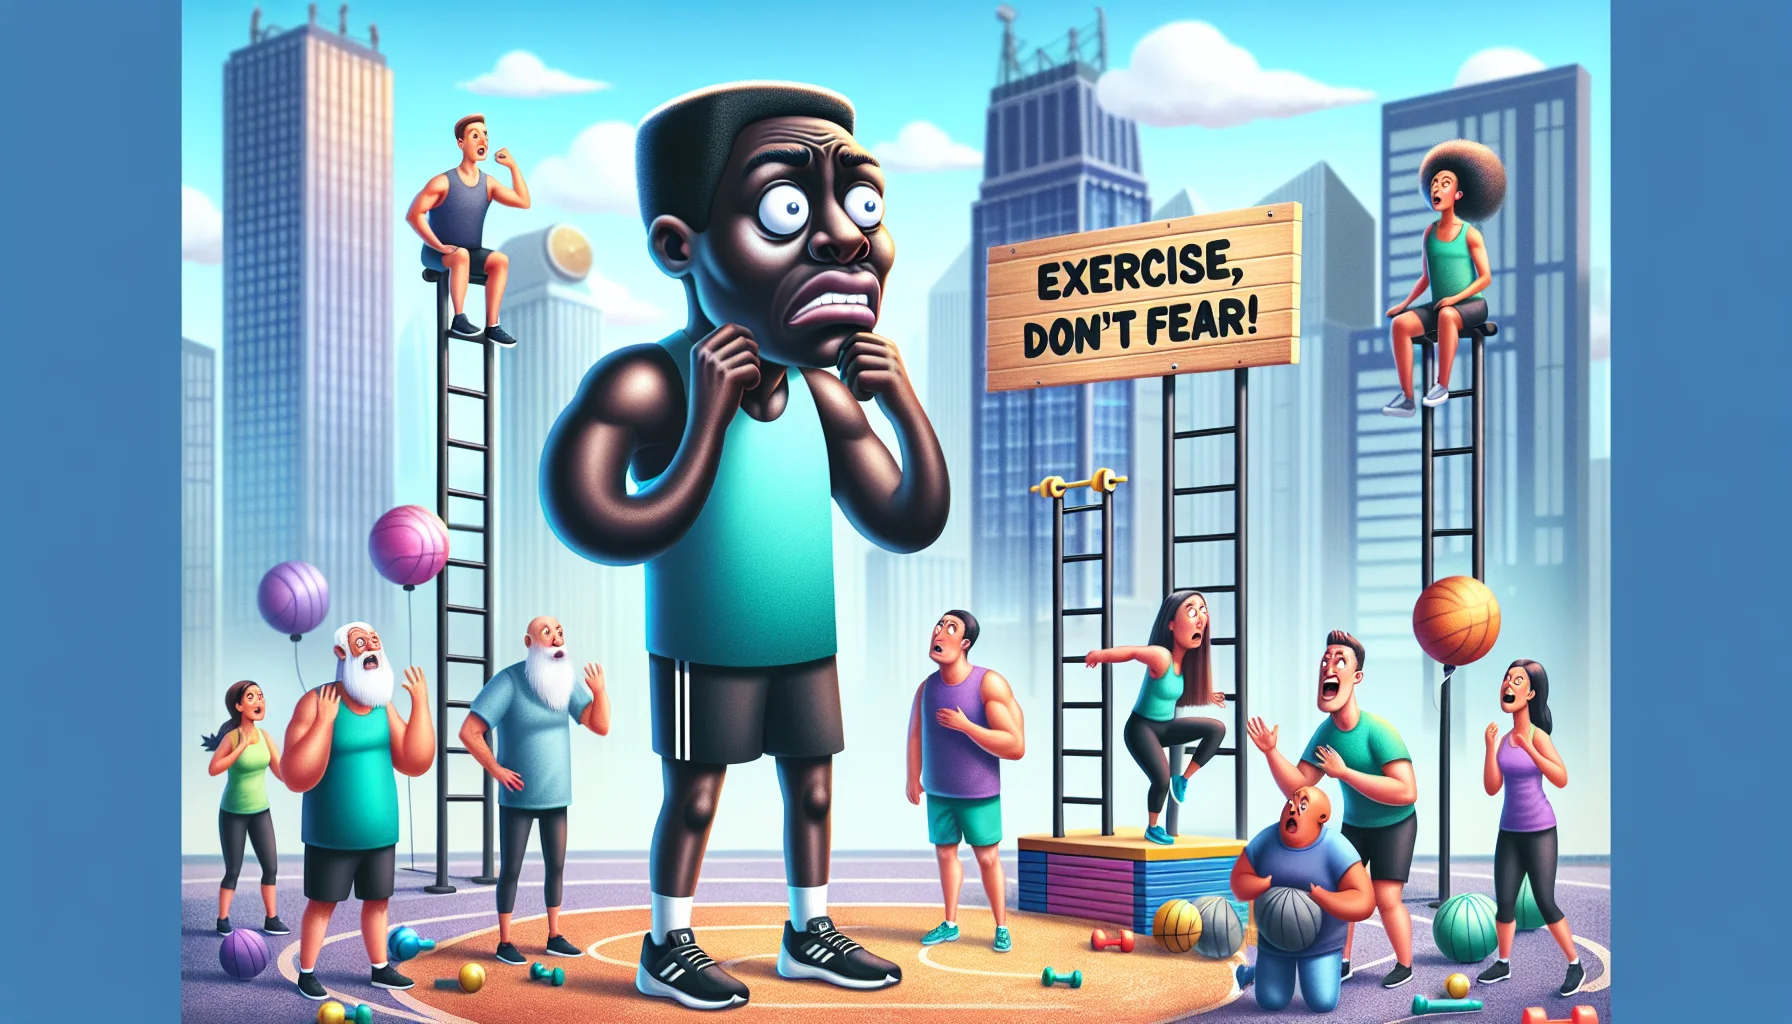 Create a whimsical and humorous image depicting a confused caricature of a tall, Black male exercising with plyometric equipment and despite his efforts, he's only getting taller, not shorter. He stands in bewilderment, surrounded by shorter fit people of varying descents and genders demonstrating different fitness activities. In the foreground, there's an 'Exercise, Don't Fear!' banner, summoning more people to join in the fun. The setting is lively, with a diverse group of people getting fit with smiles on their faces, debunking the myth that plyometric exercise stunts growth.